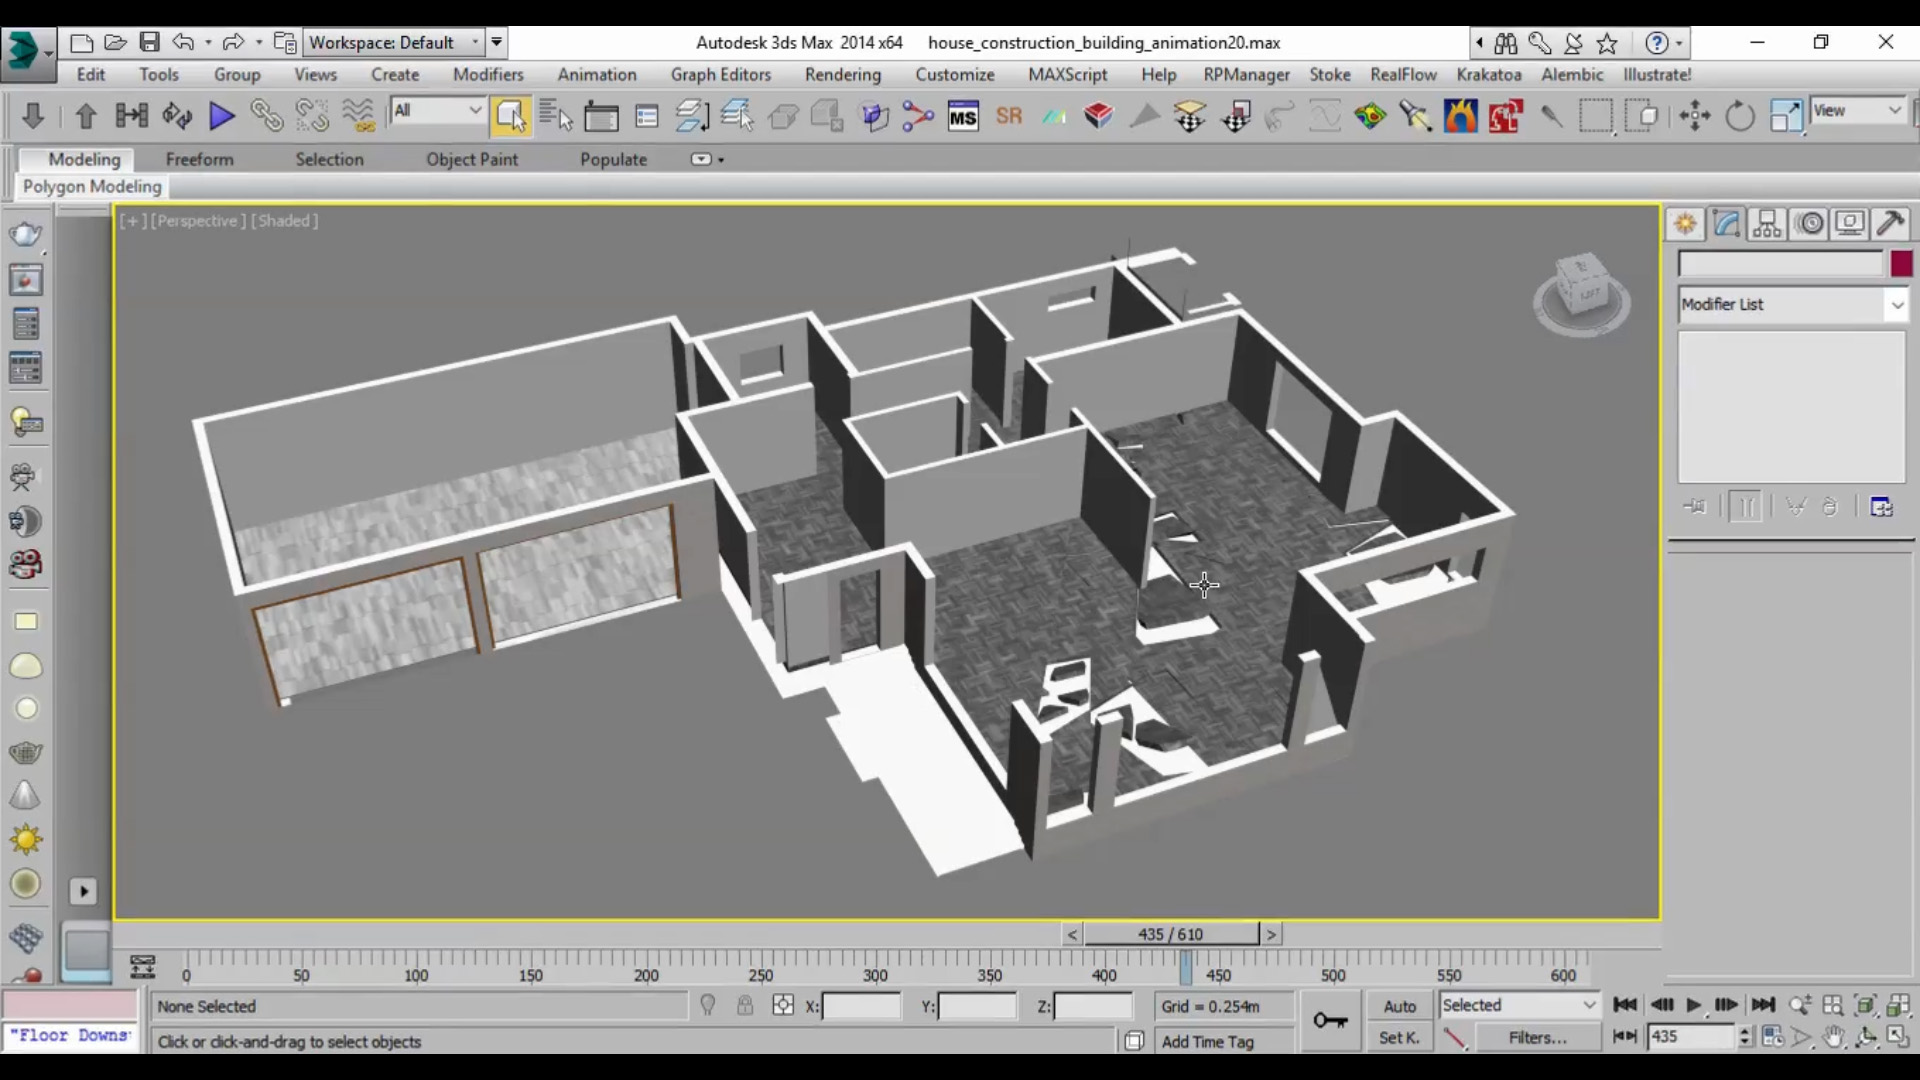 House Building Construction Animation in Autodesk 3D Studio Max -  